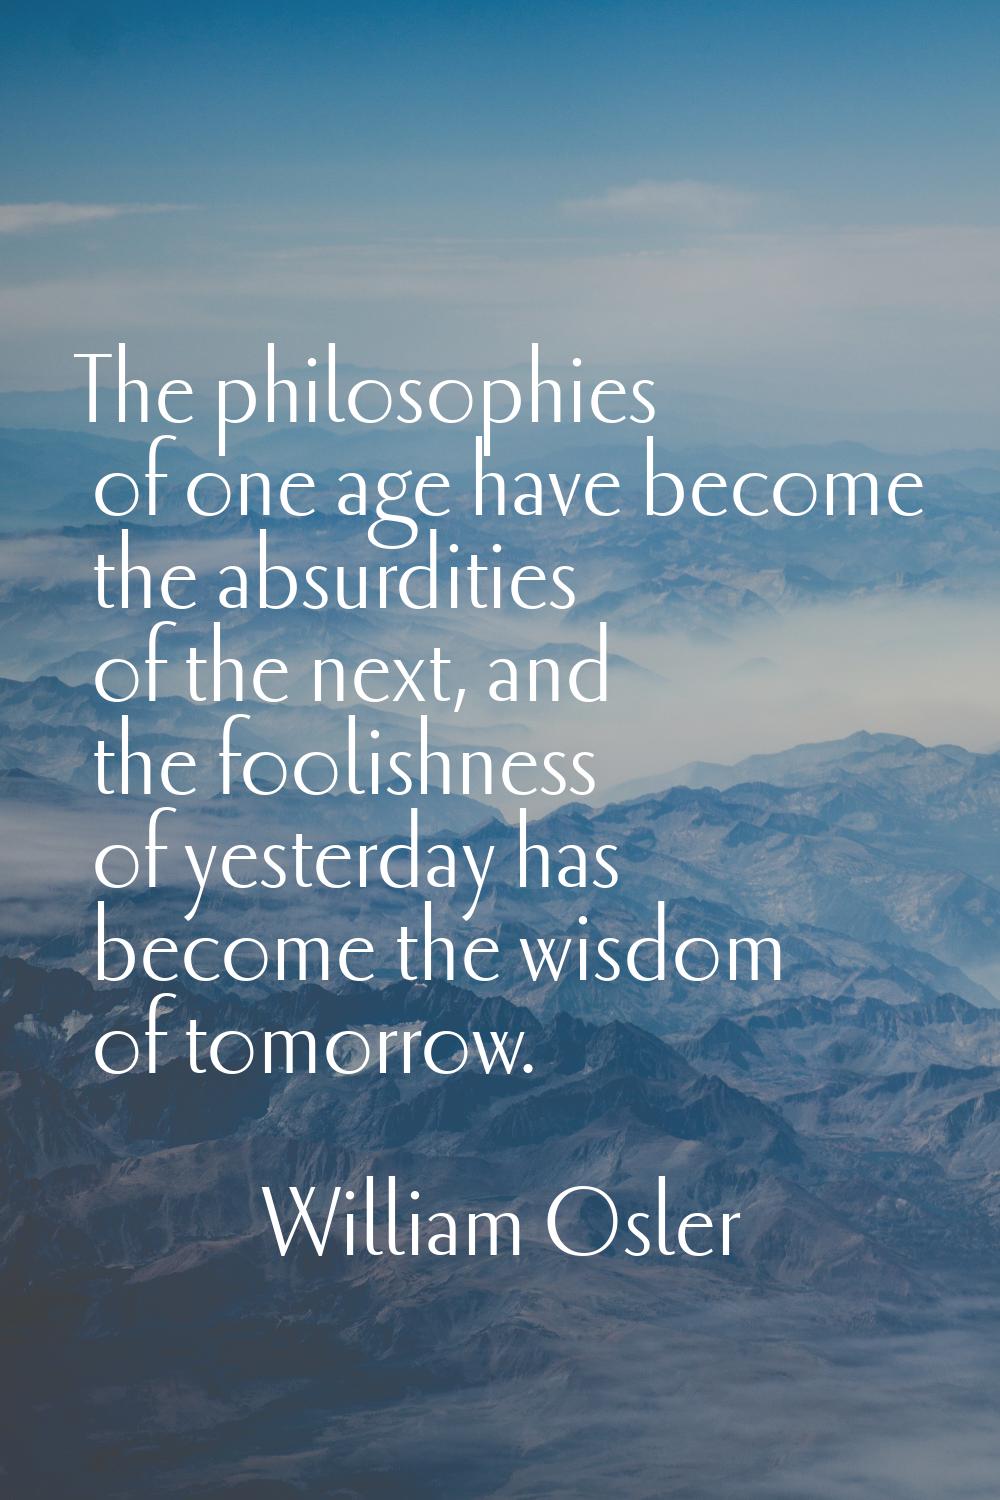 The philosophies of one age have become the absurdities of the next, and the foolishness of yesterd